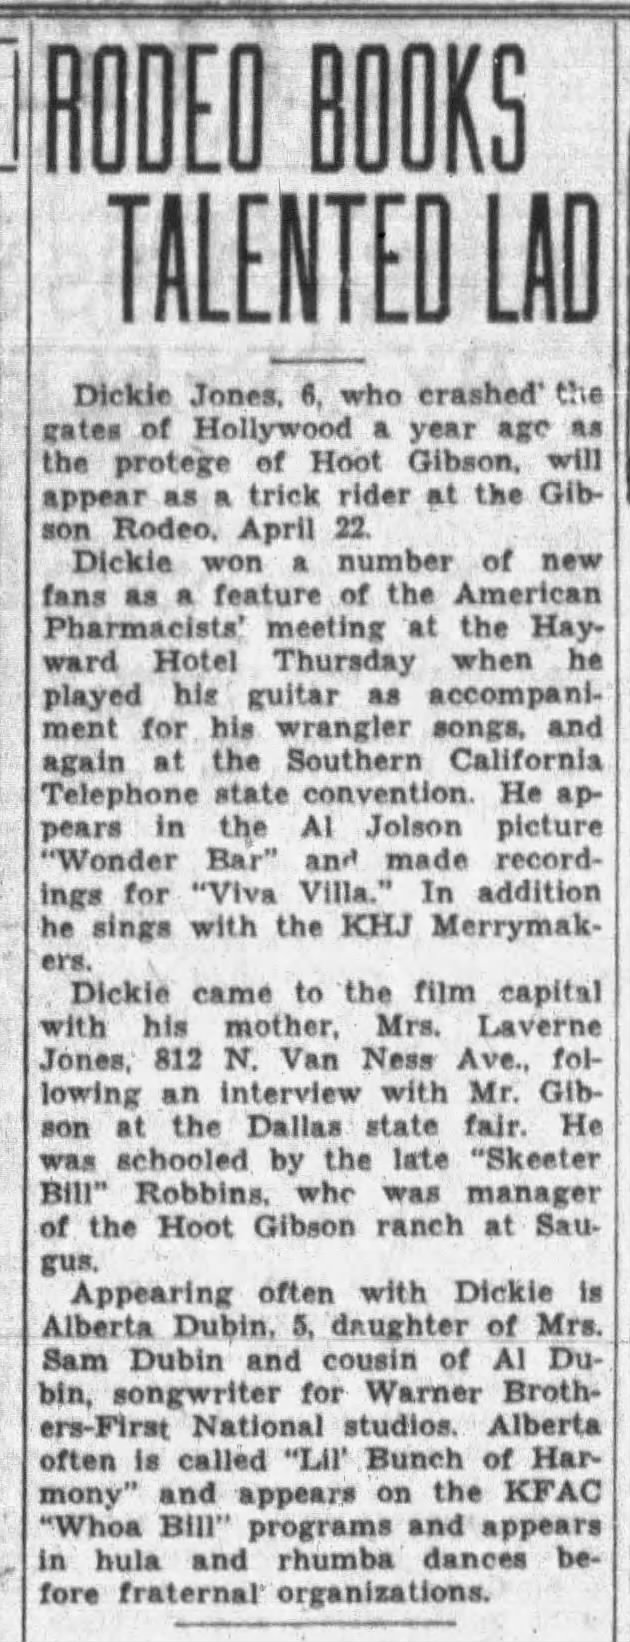 6 year old Dickie Jones, protege of western movie star Hoot Gibson, is in Hollywood doing movies.